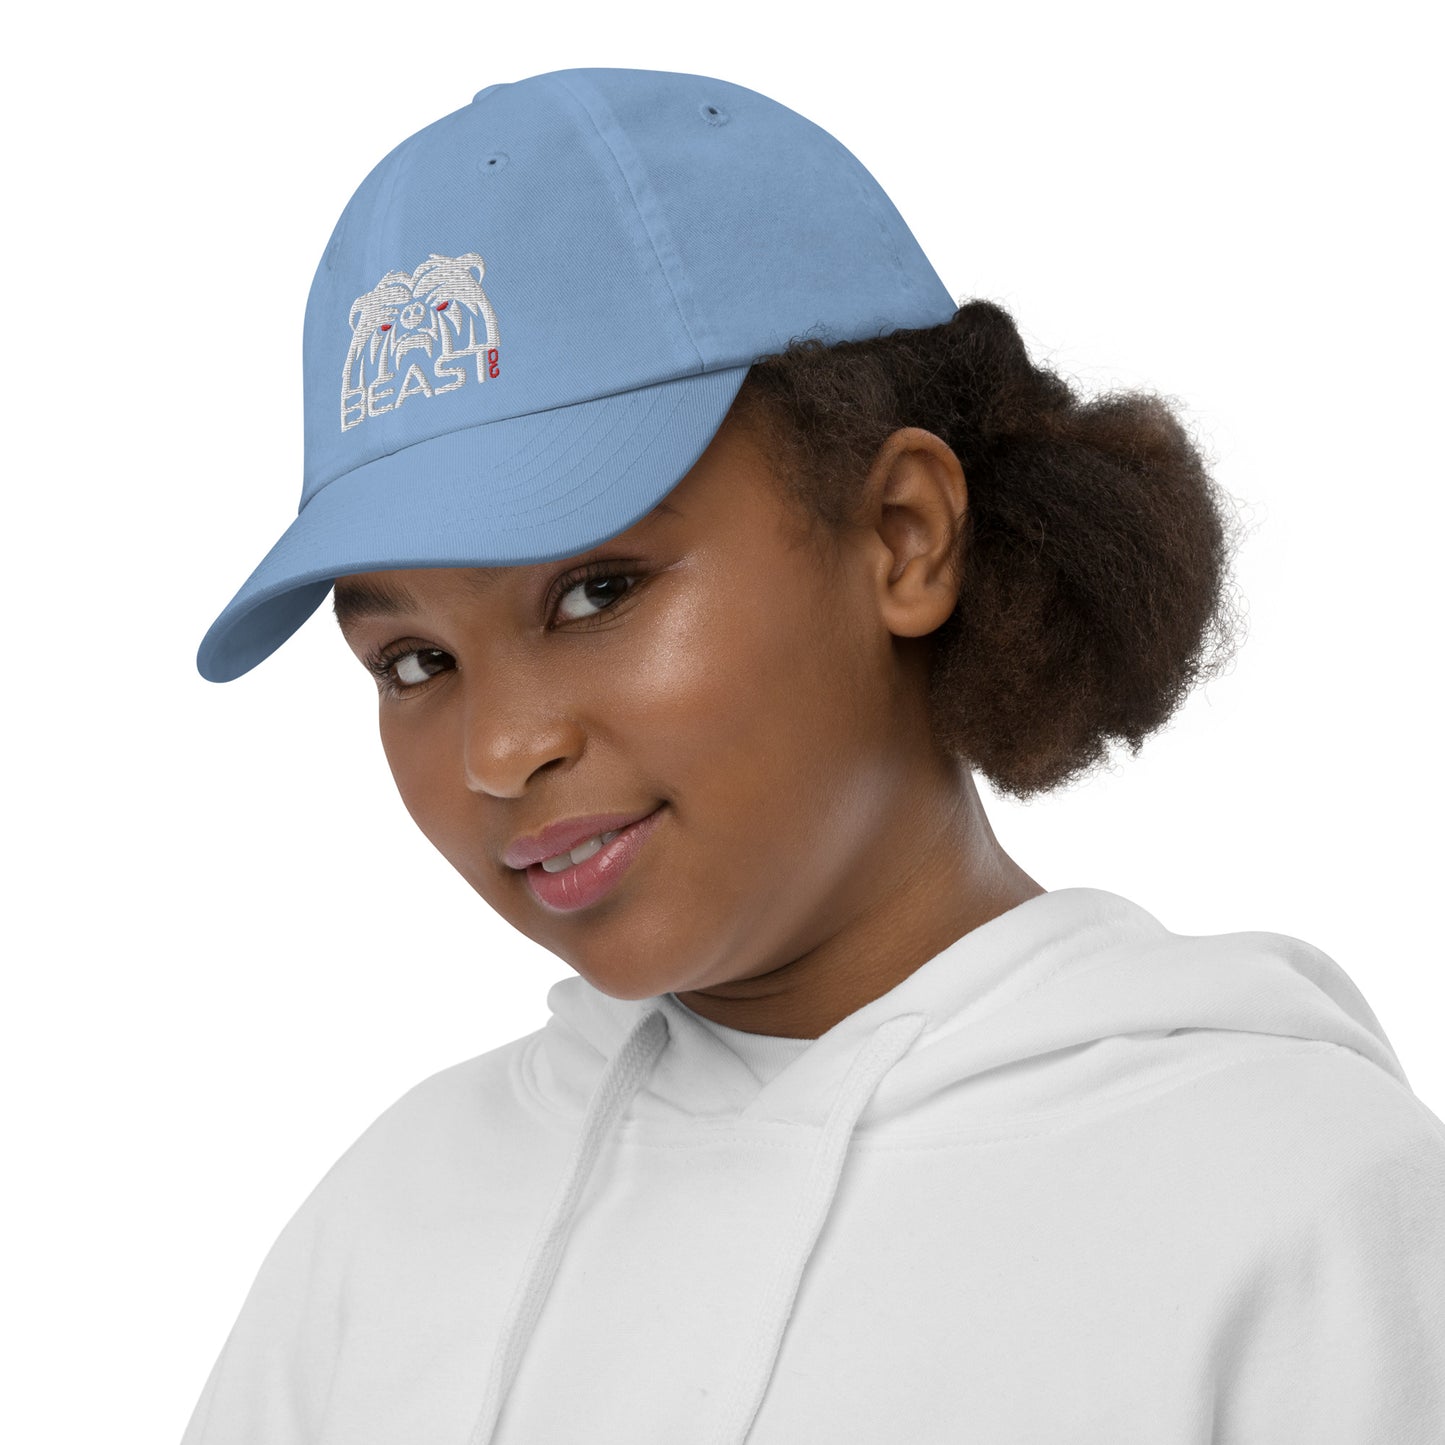 Youth Hat